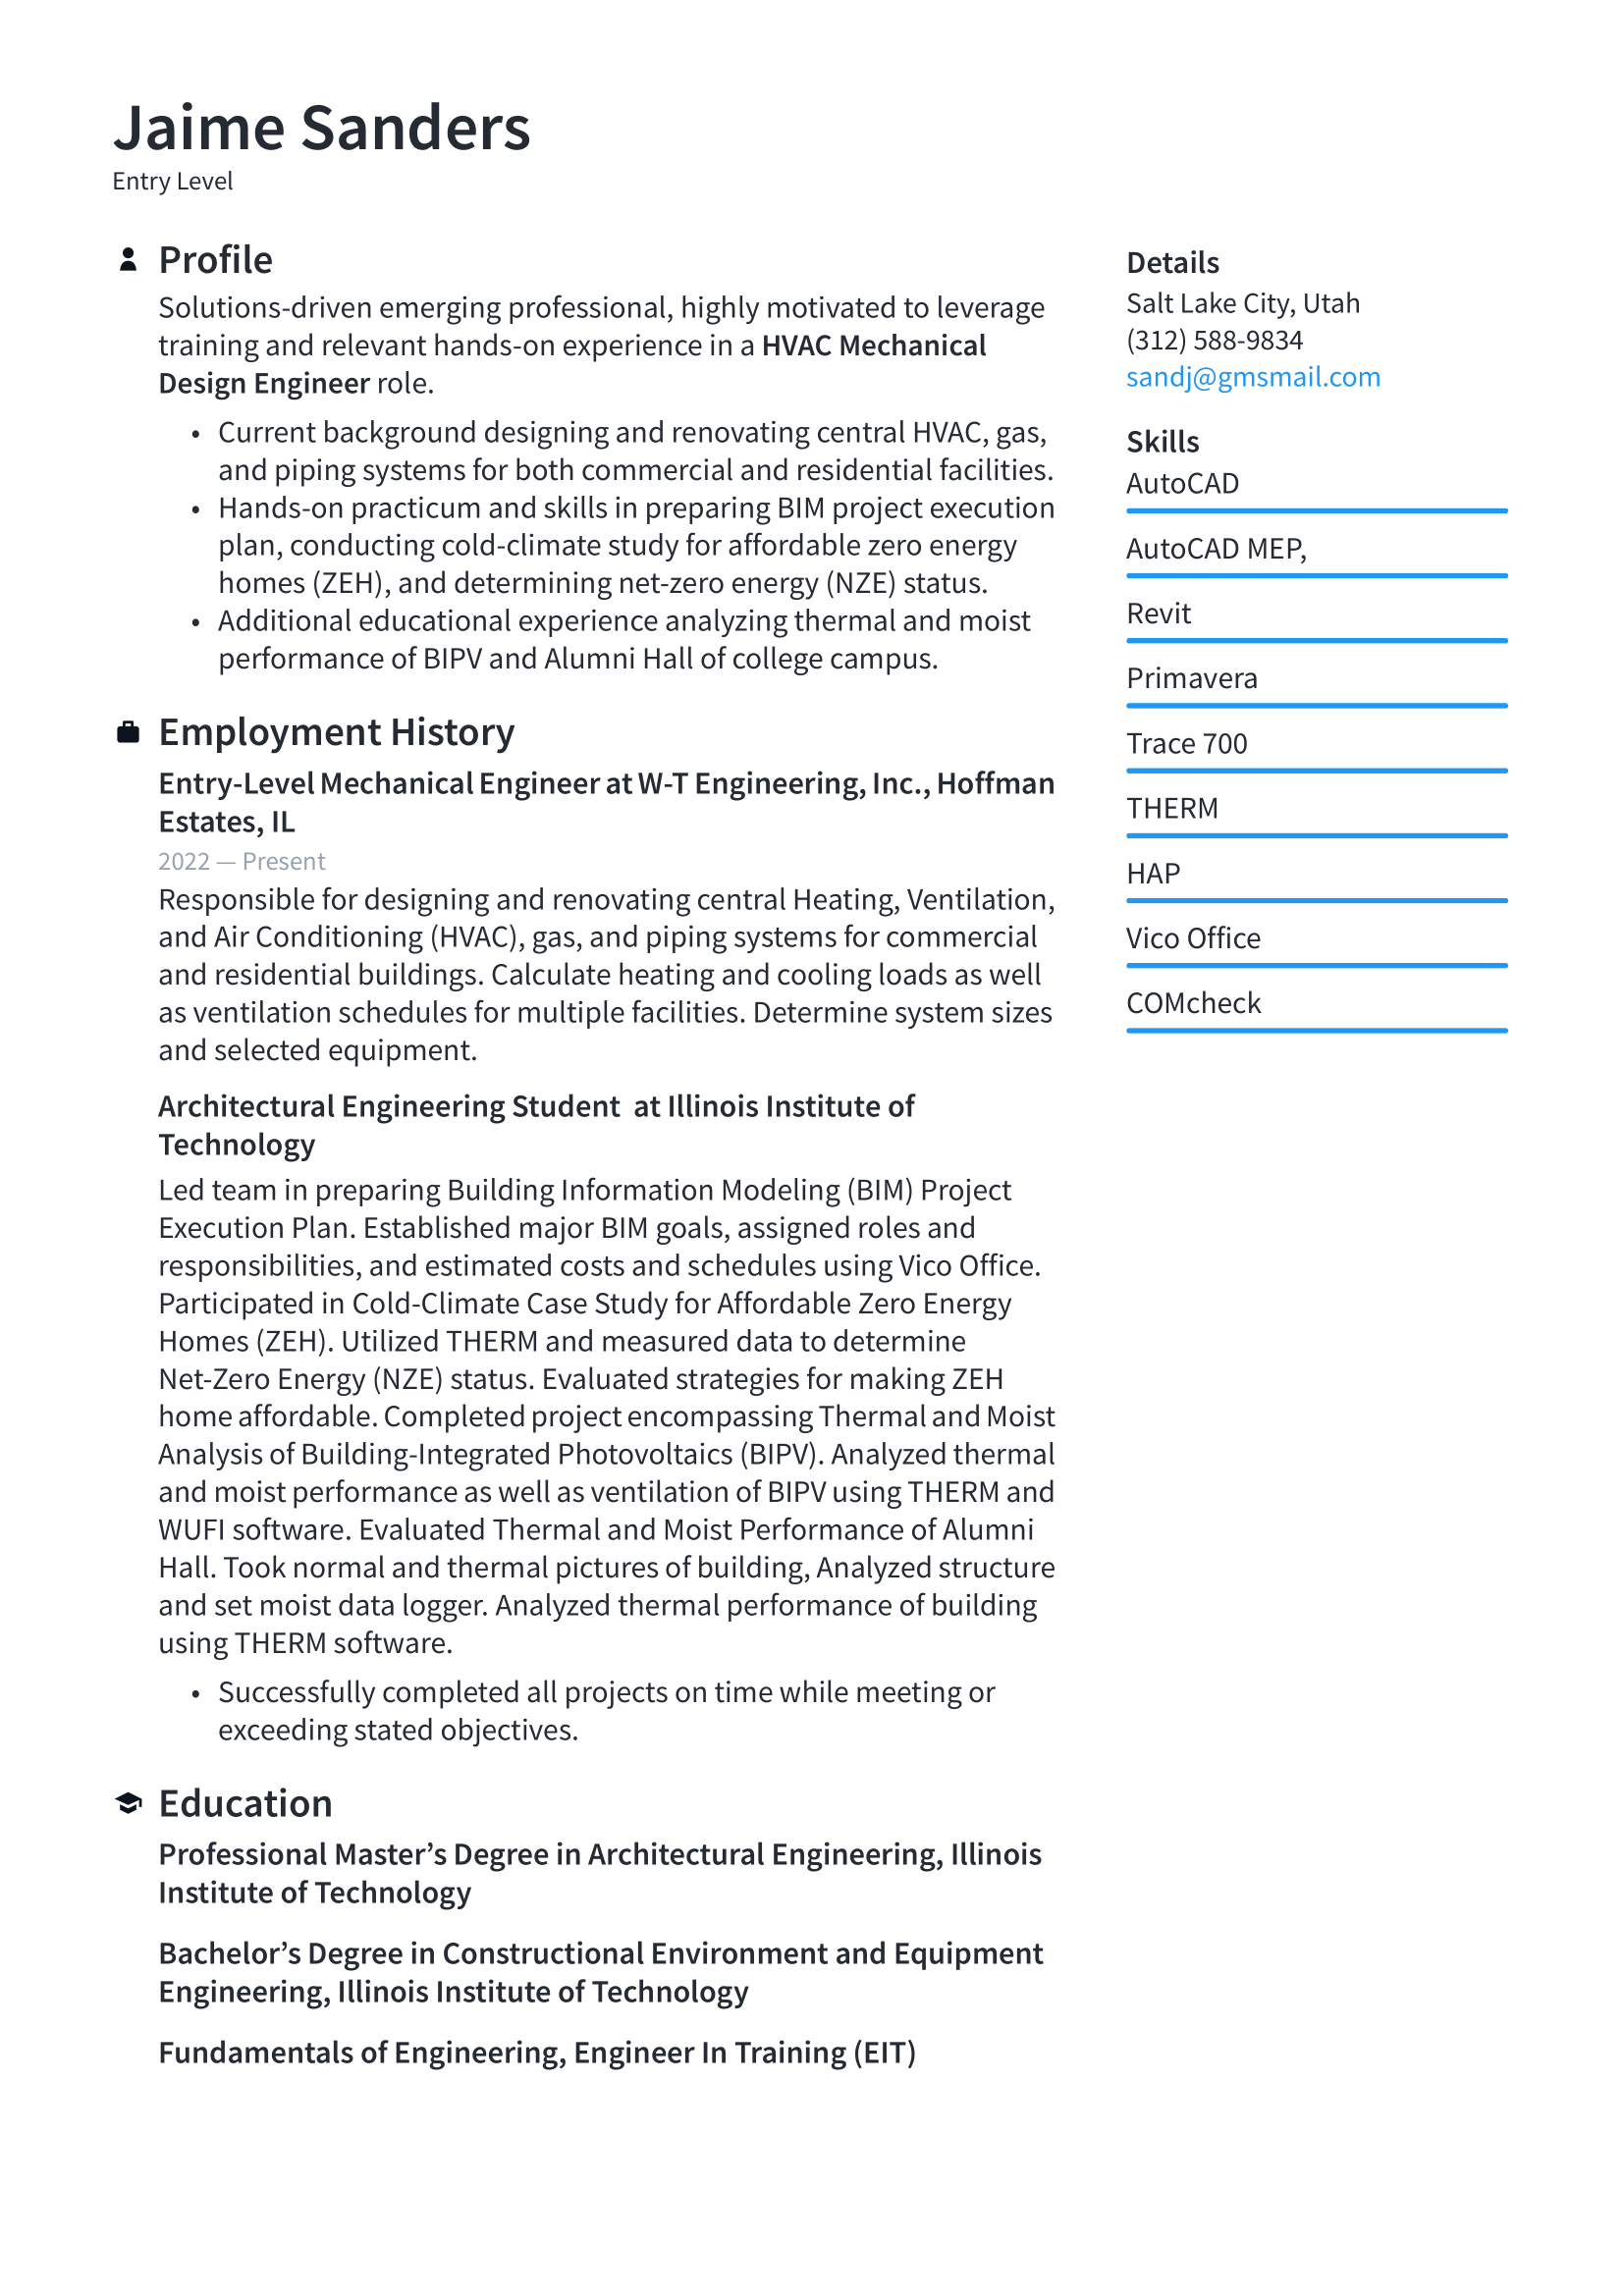 Entry-Level Resume Example & Writing Guide